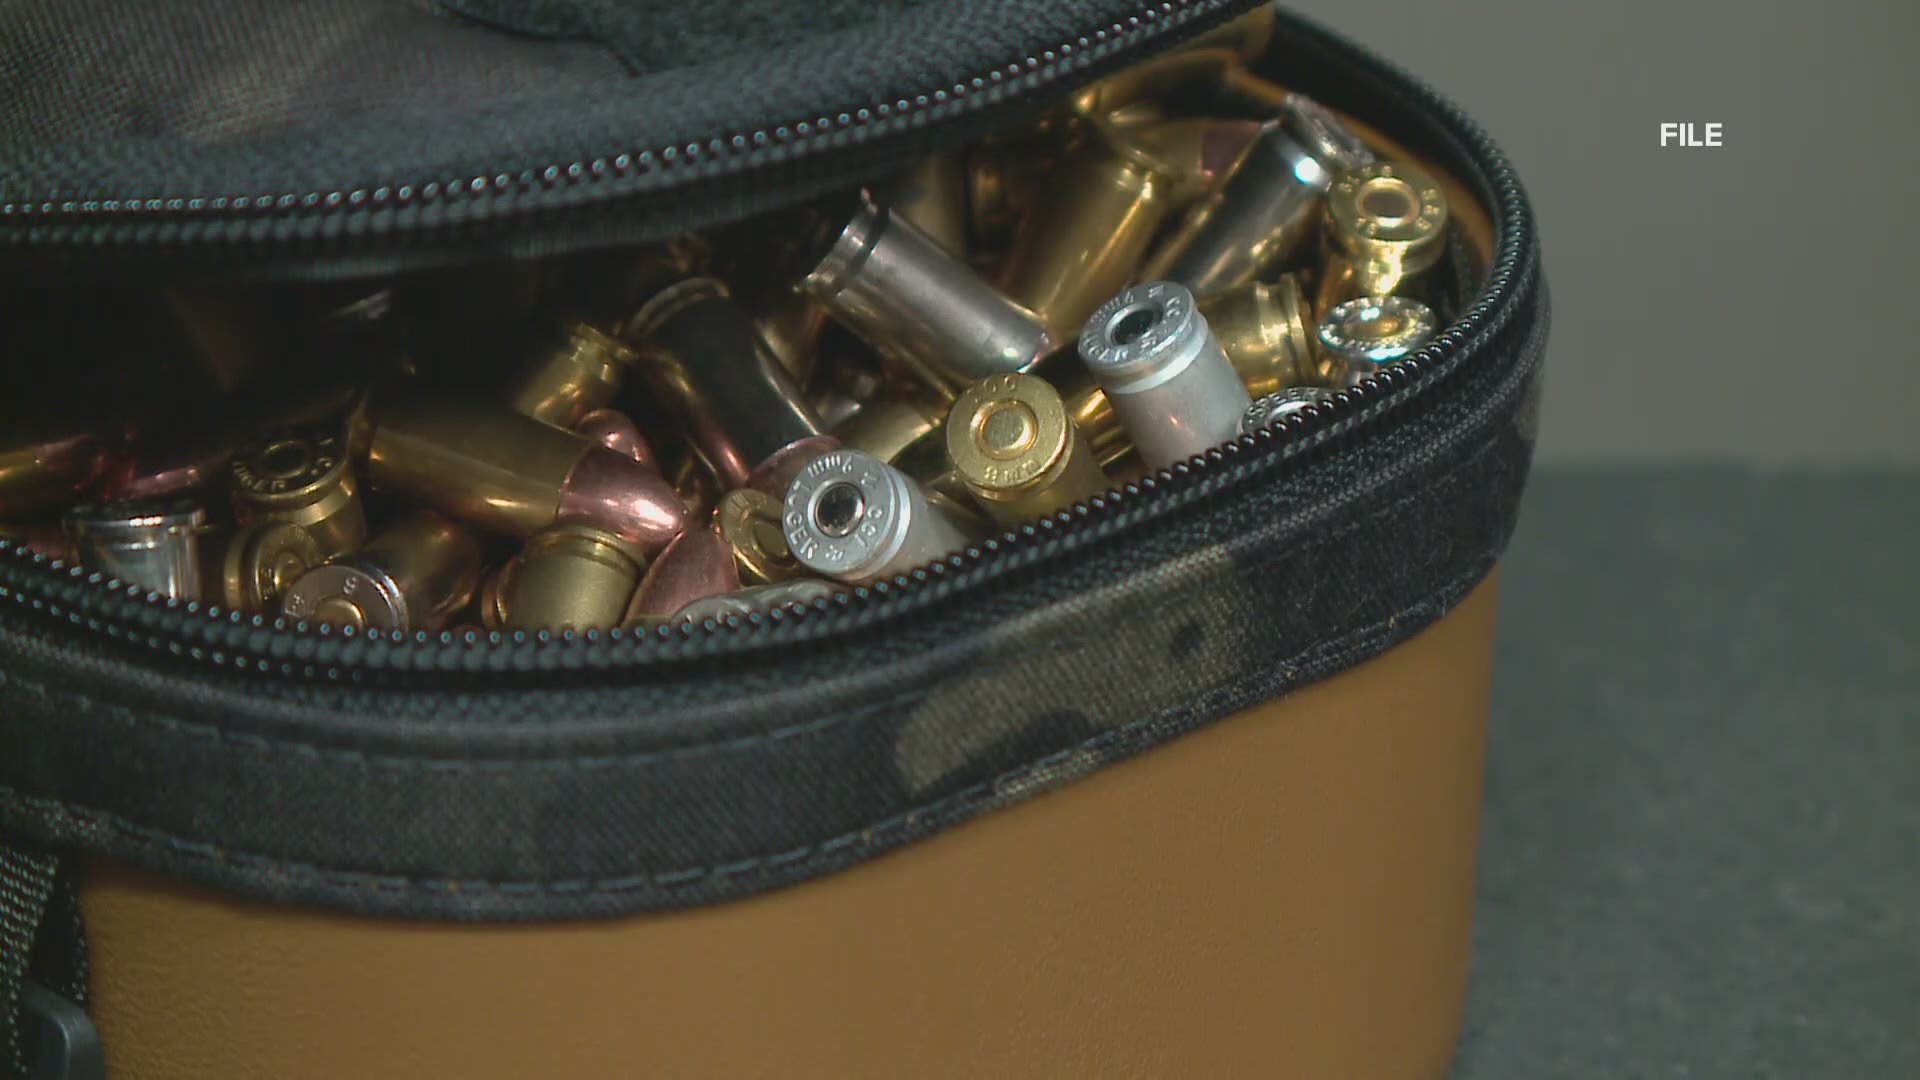 Law enforcement officials are sharing gun safety tips and asking parents to be more attentive when it comes to firearms in the home.